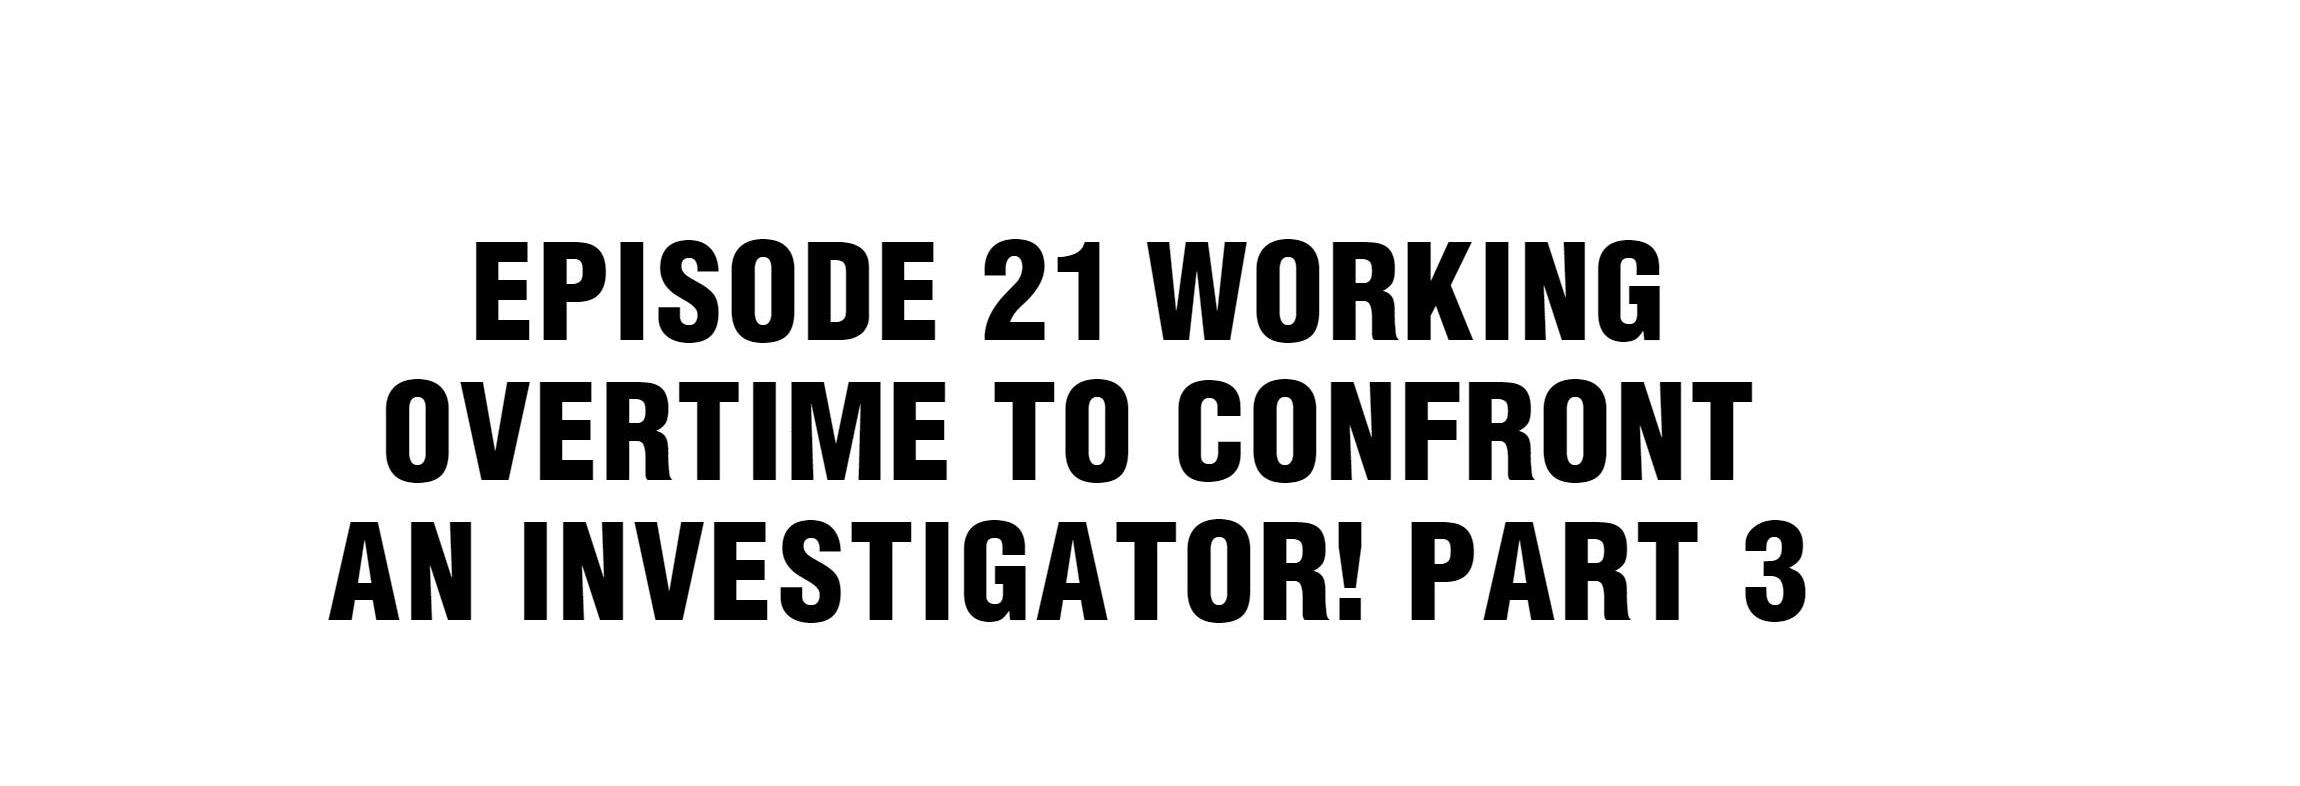 Working Overtime To Destroy The World! Chapter 21: Working Overtime To Confront An Investigator! Part 3 - Picture 2